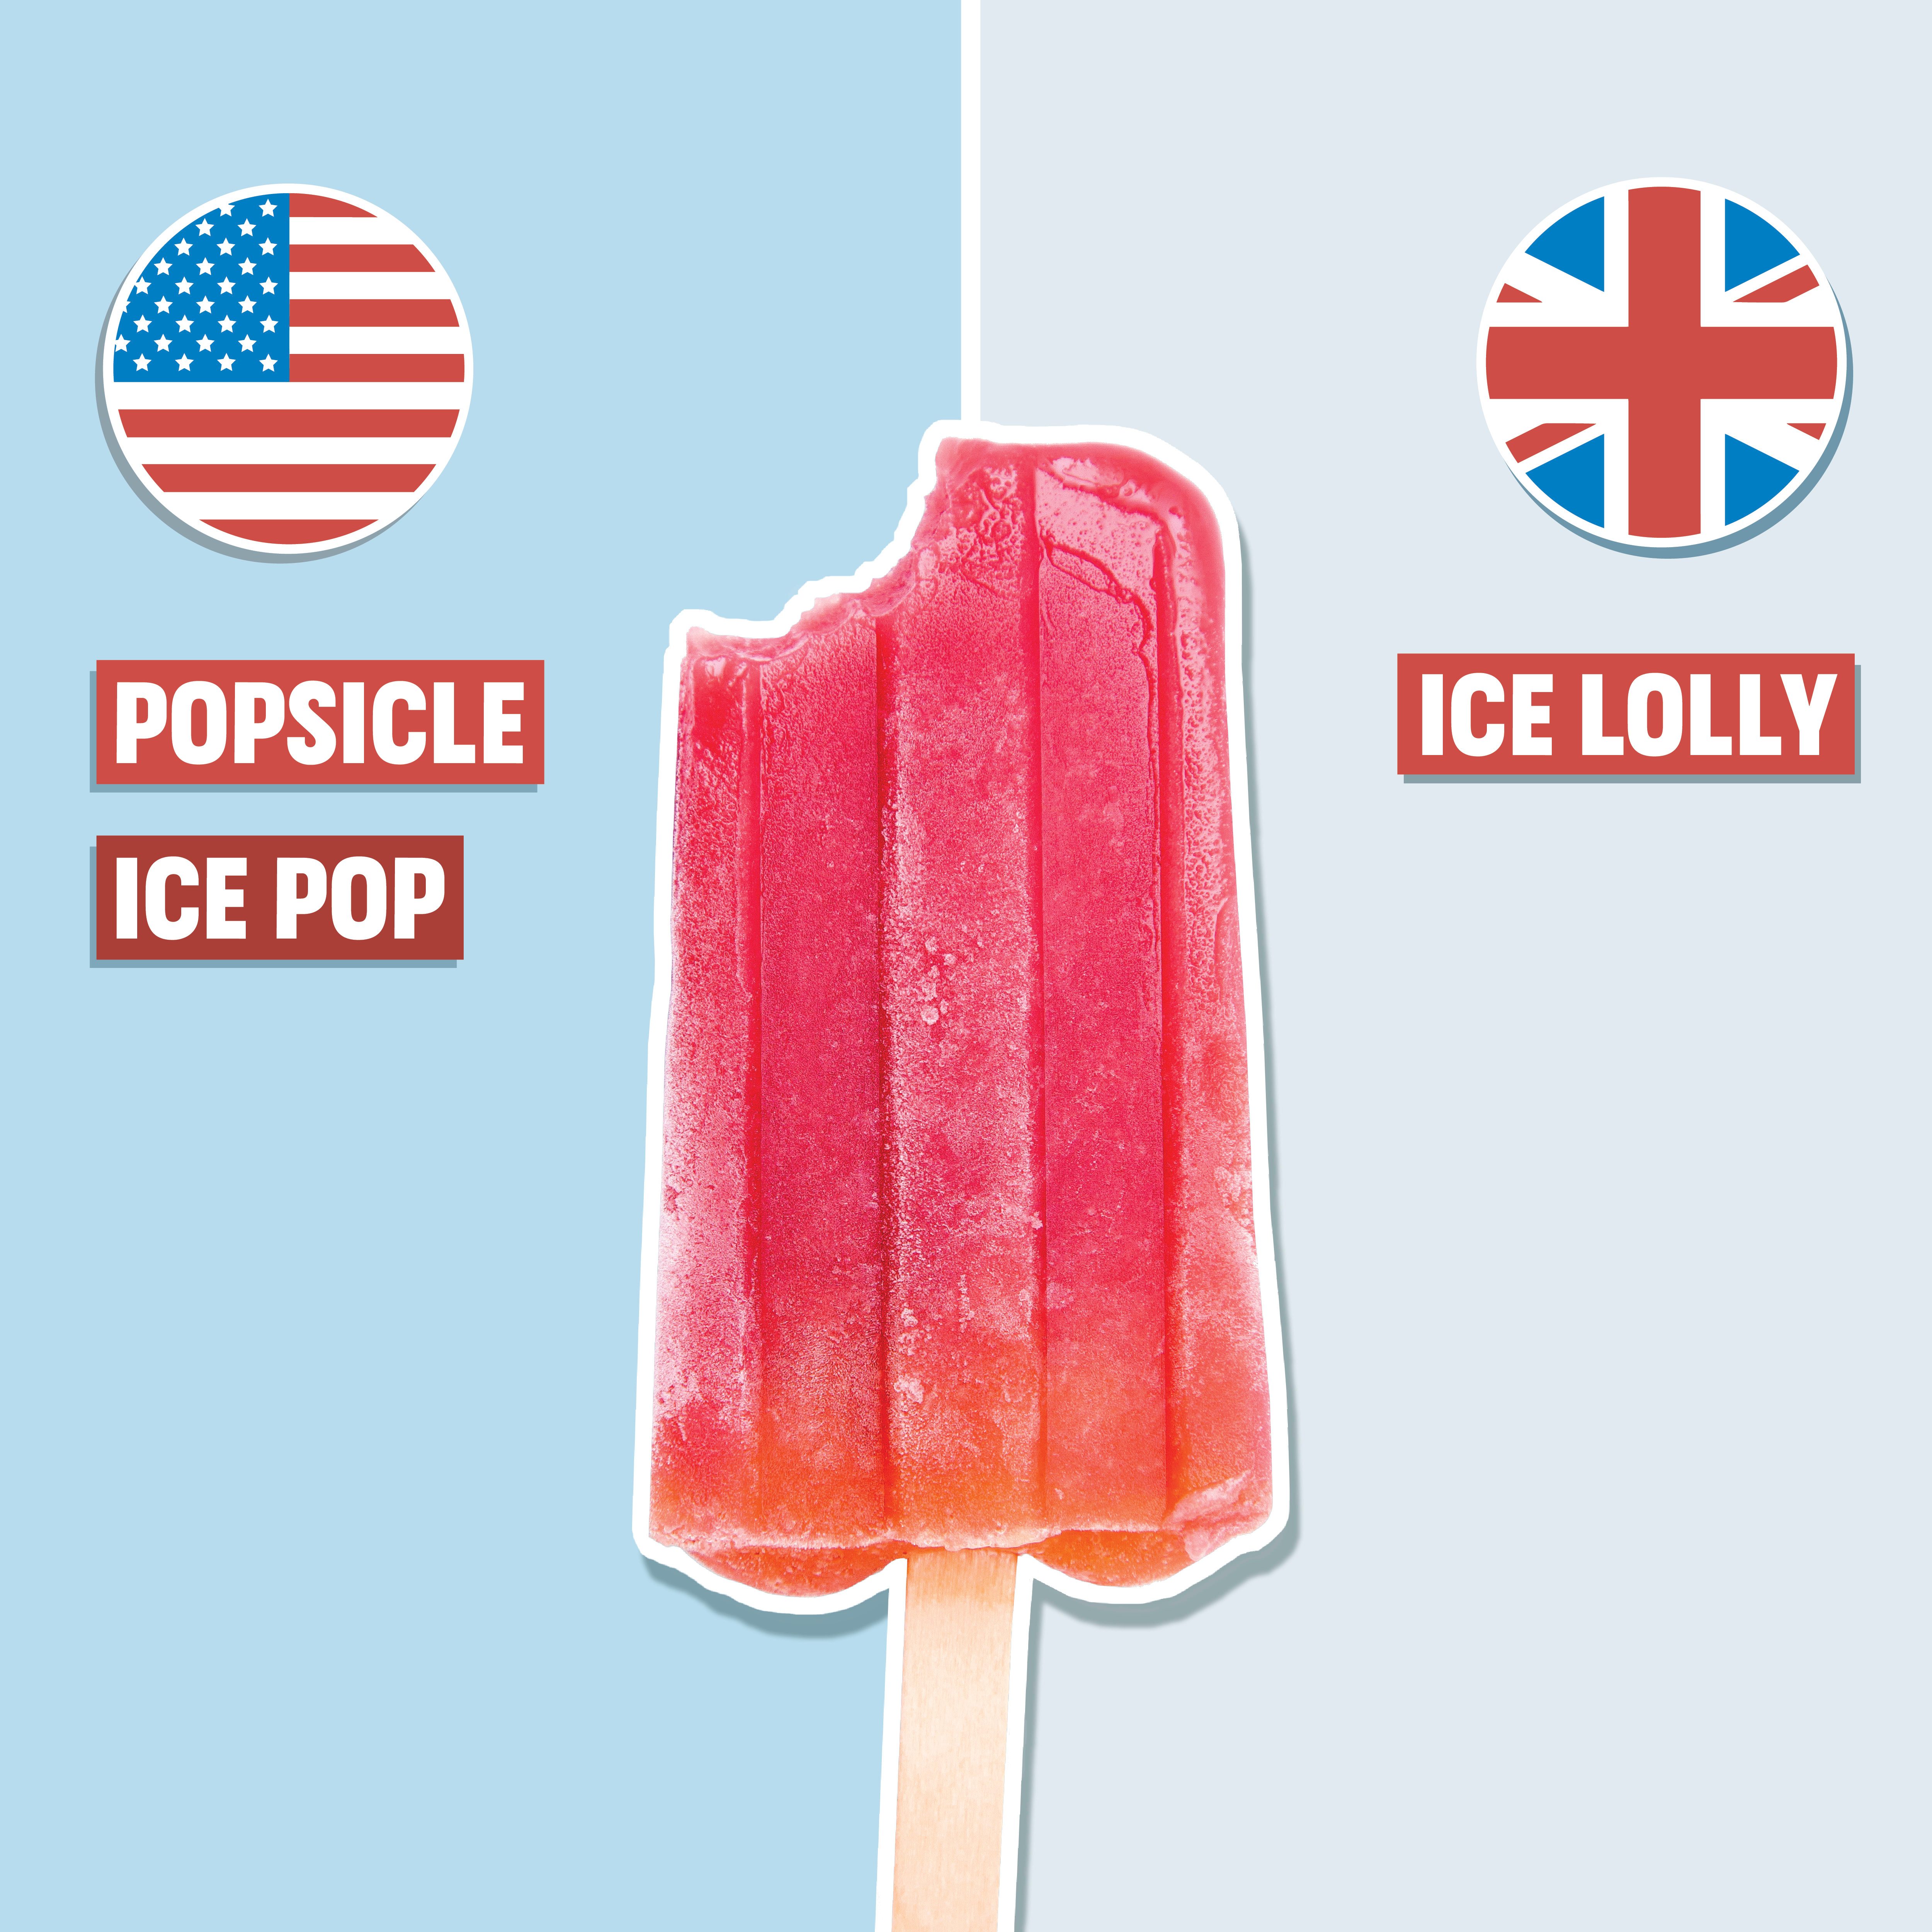 popsicle on blue background with american and british english pronunciation on either side